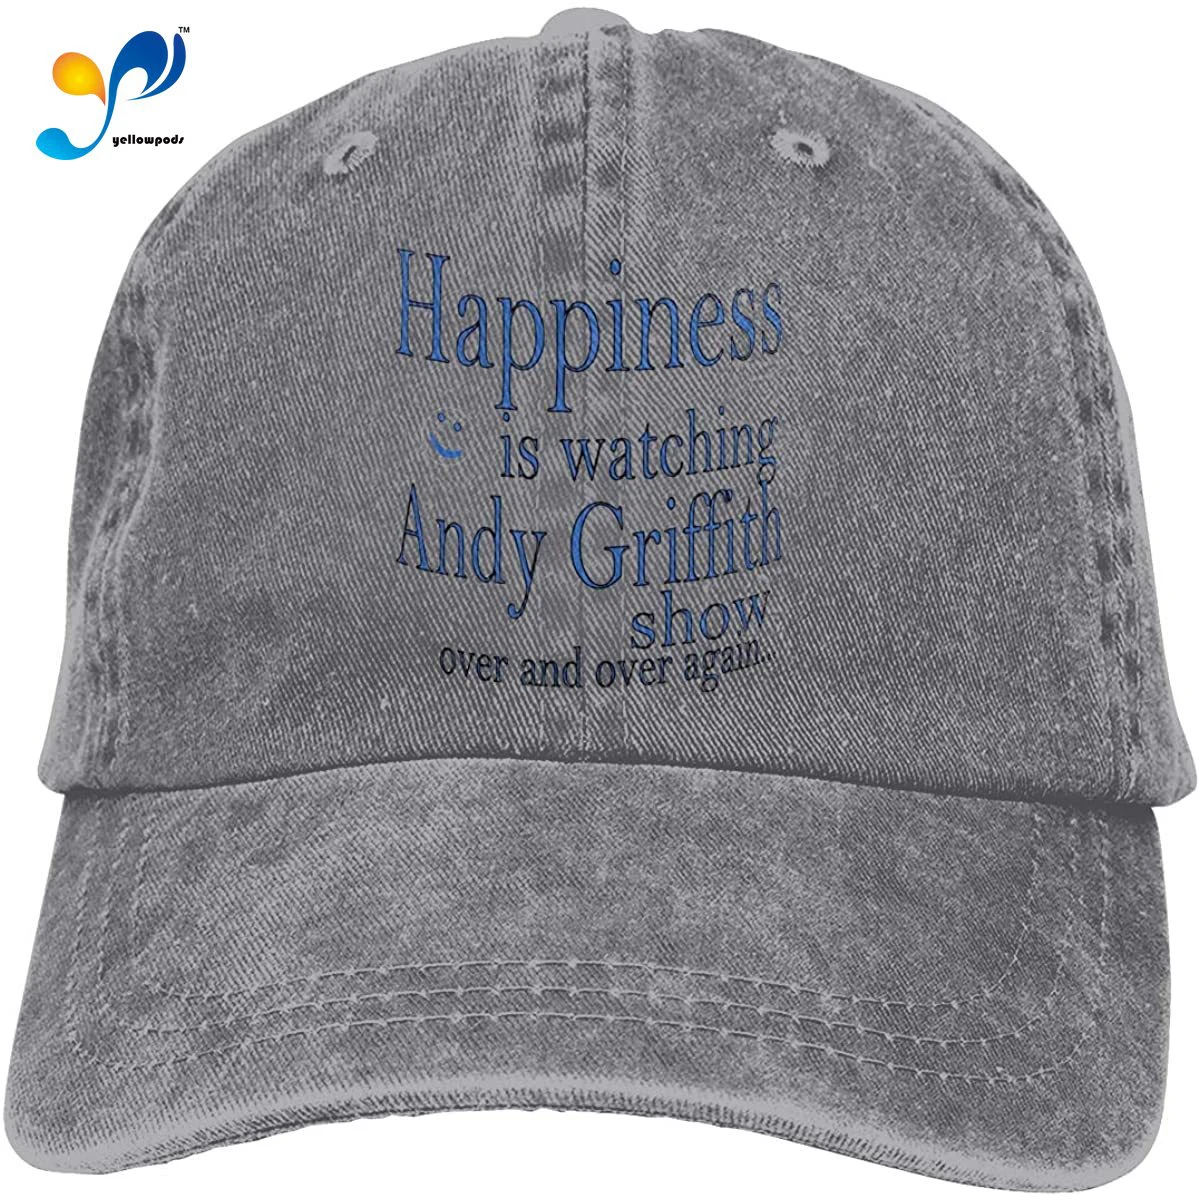 

Happiness Is Watching Andy Griffith Unisex Basic Casquette Hat Vintage Adjustable Hip Hop Baseball Caps Trucker Hat Black